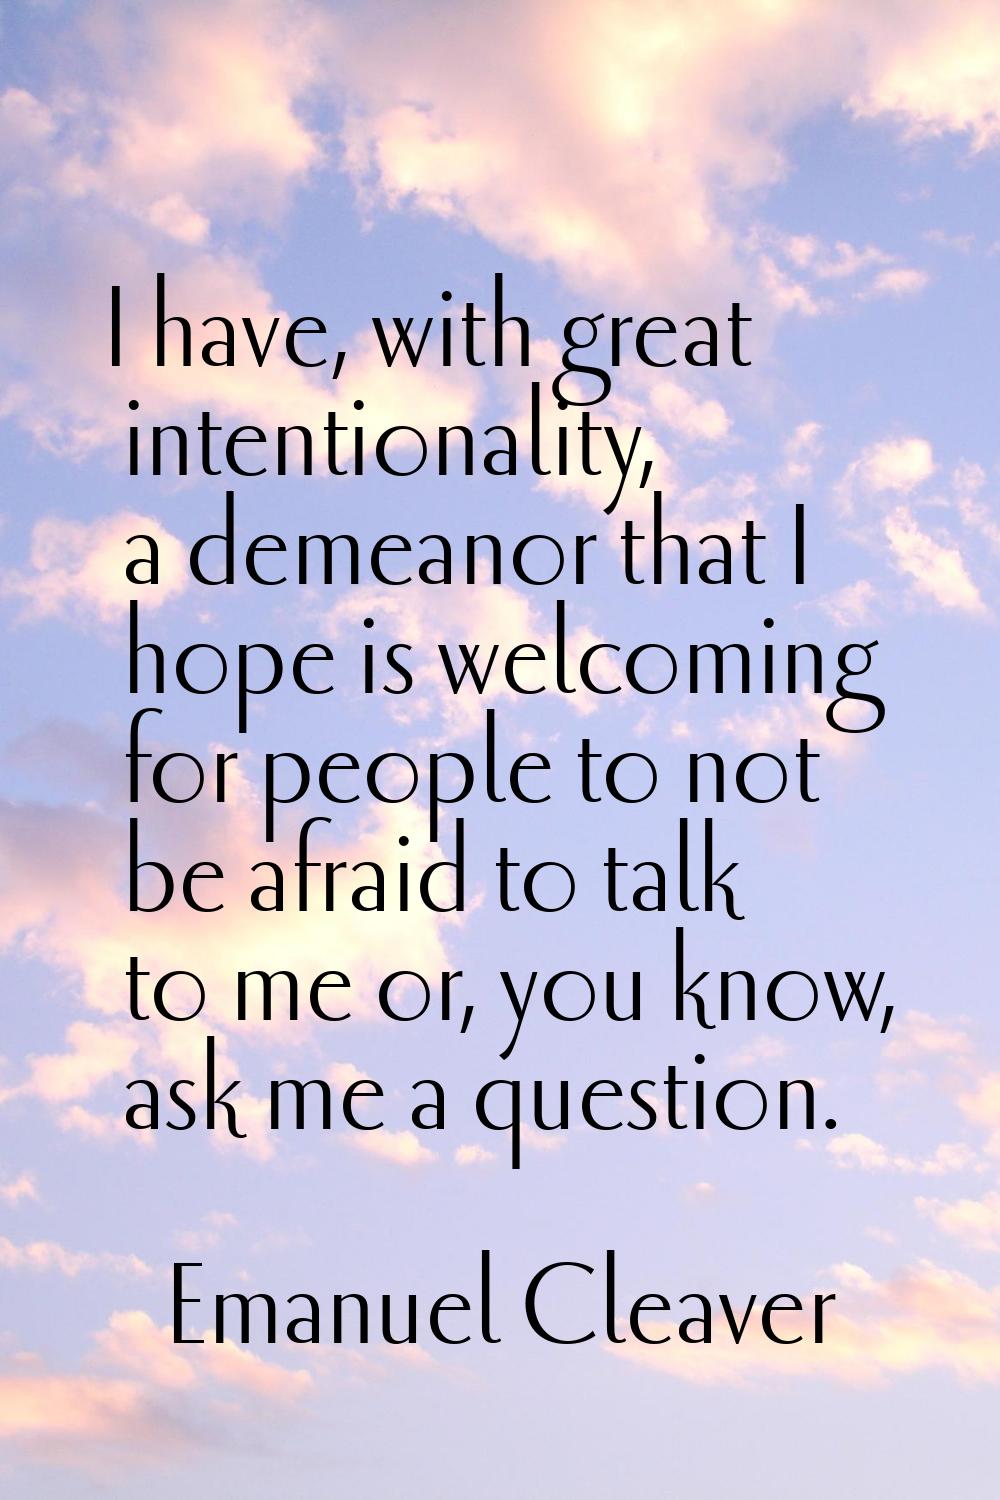 I have, with great intentionality, a demeanor that I hope is welcoming for people to not be afraid 